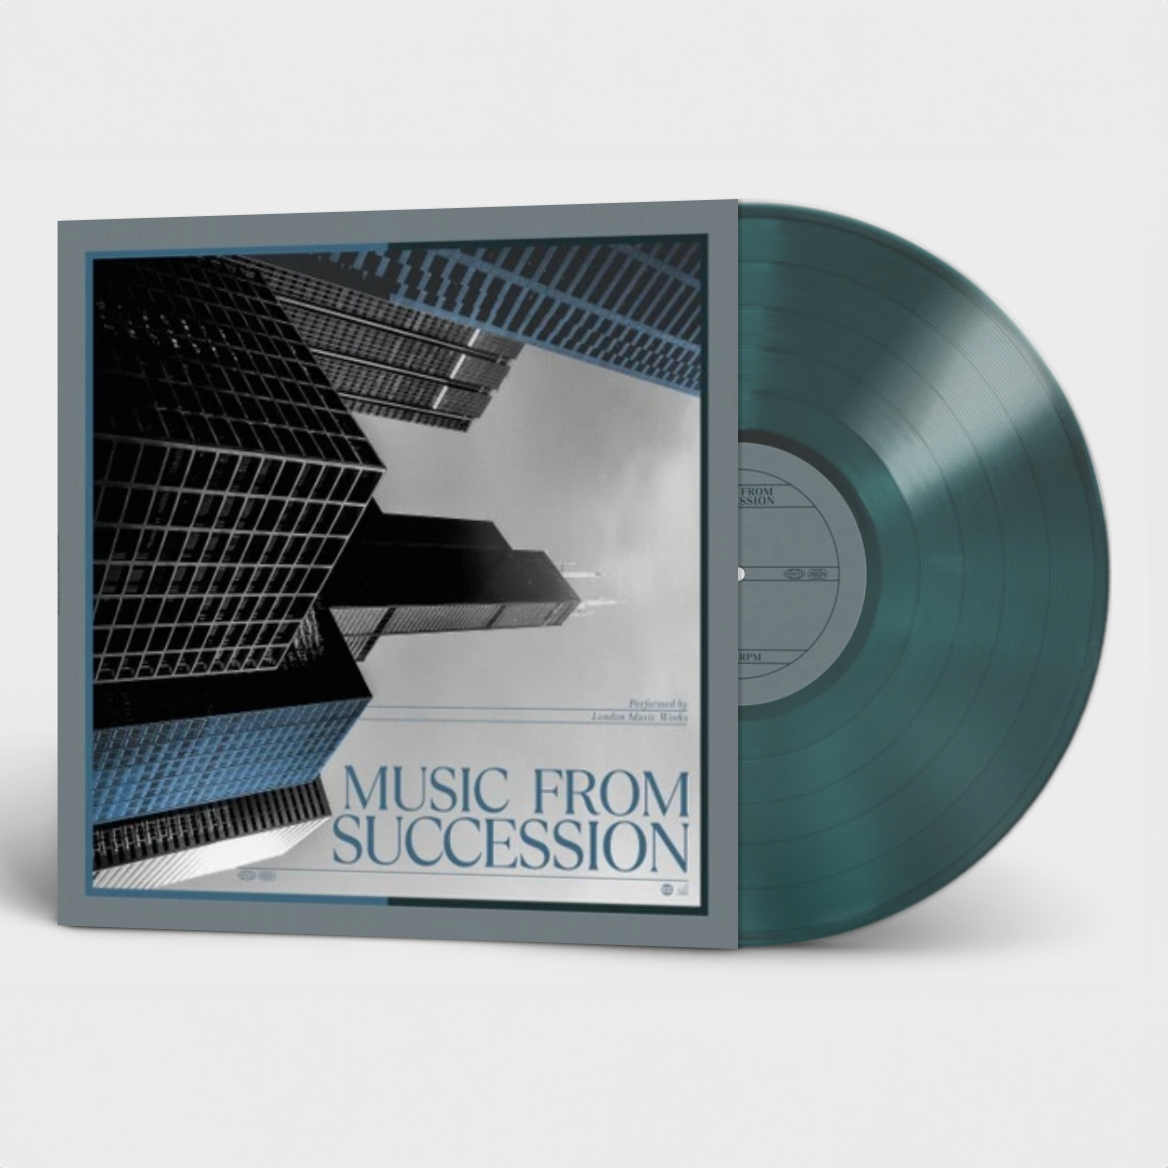 London Music Works - Music From Succession: Dark Green (w/ Hint of Blue) Vinyl LP